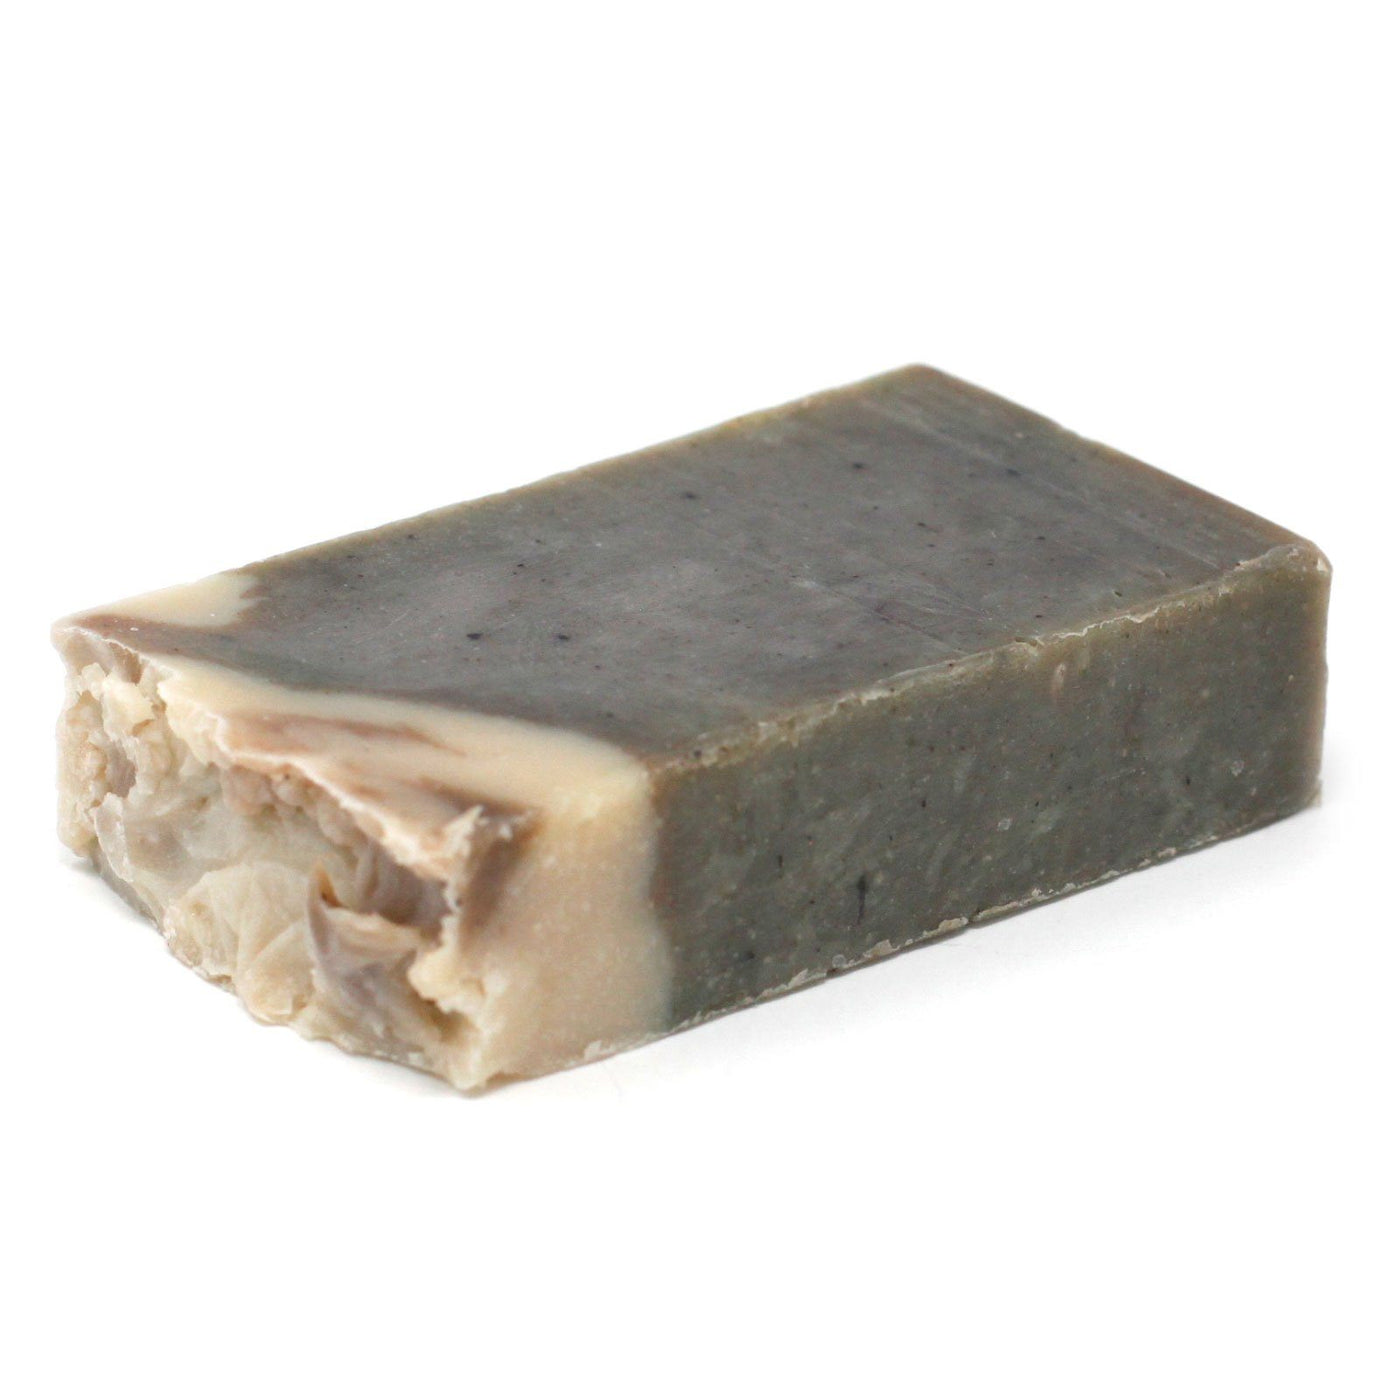 Chocolate Paraben Free Olive Oil Soap Loaf And Slices.